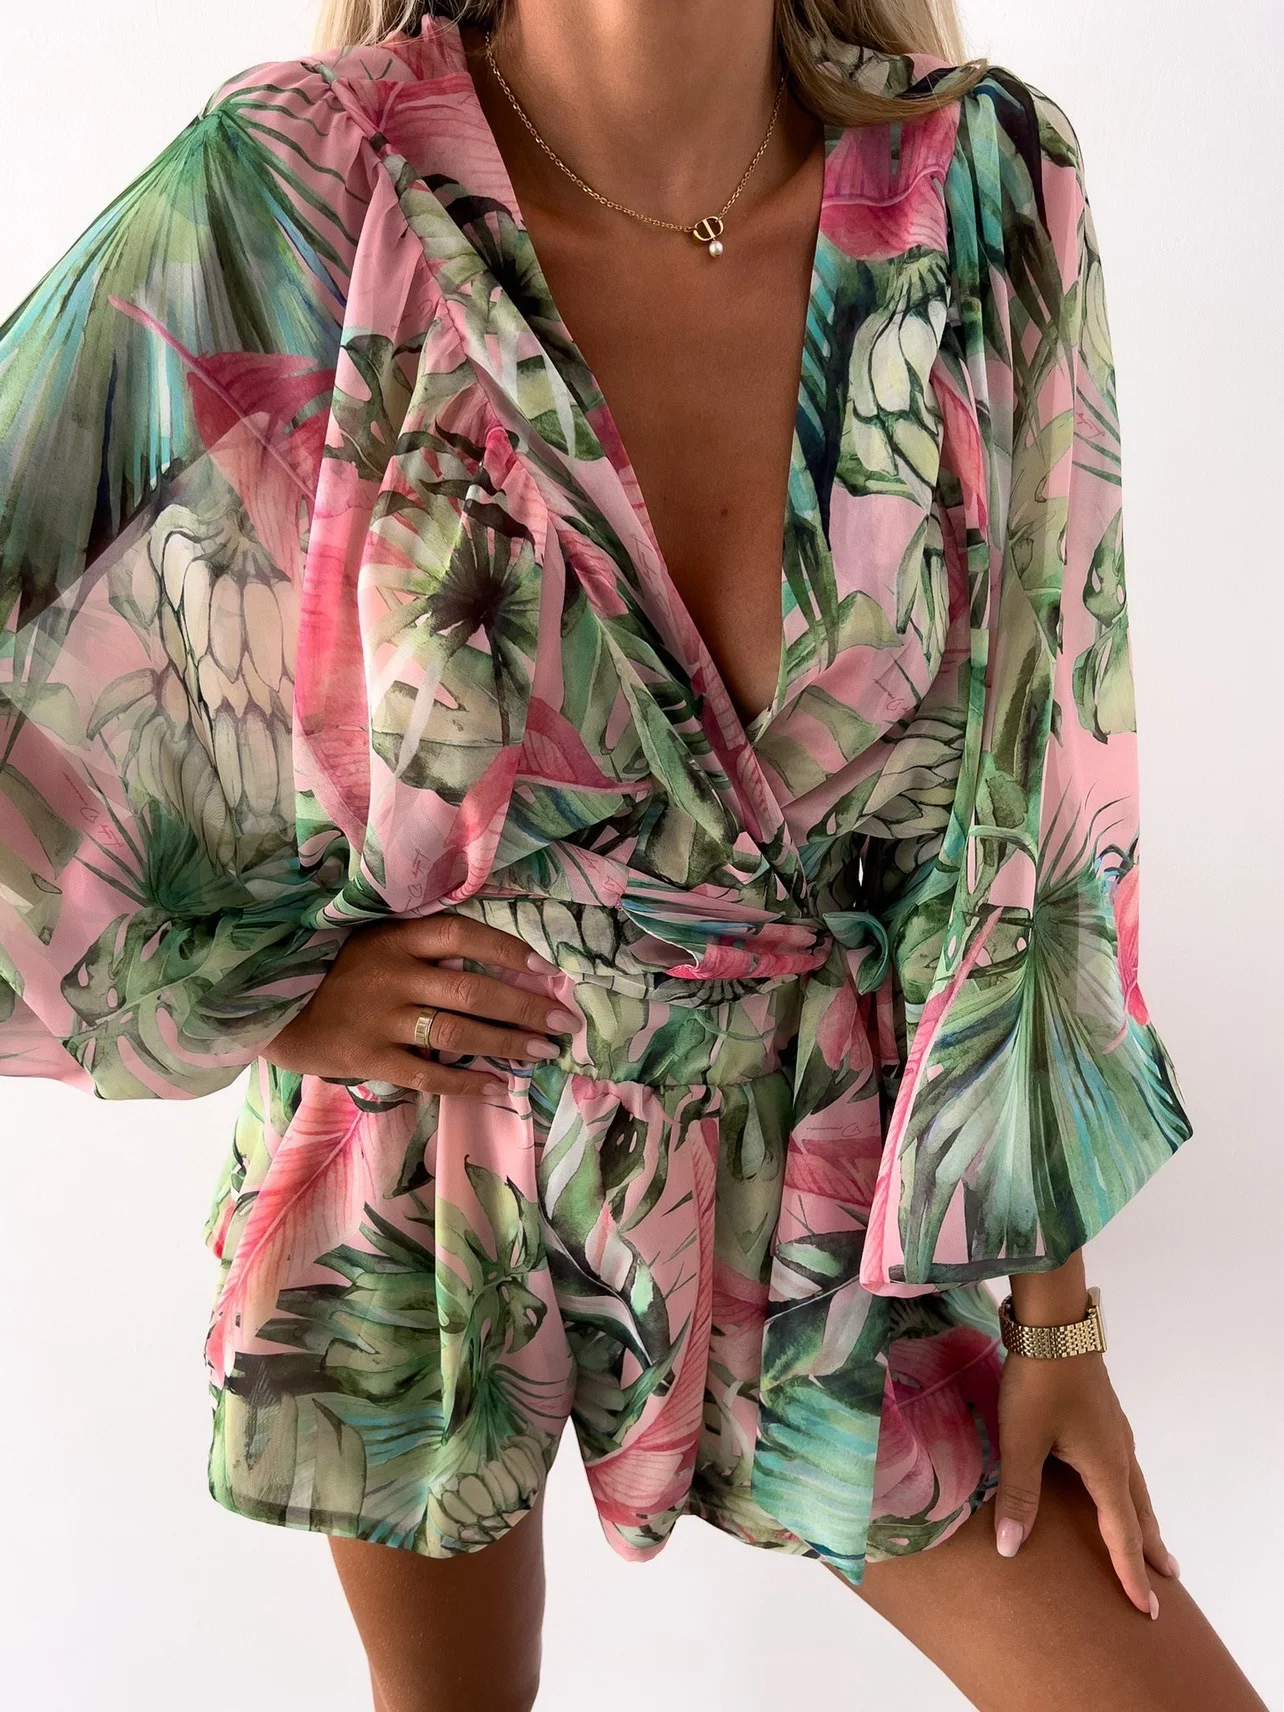 2023 Sexy Deep V Neck Jumpsuit For Women Summer Casual Boho Beach Vacation Outfit Fashion Print Lantern Sleeve Rompers Shorts 2021 summer purple floral print jumpsuits women harajuku loose deep v neck lantern sleeve playsuit casual belt short jumpsuit